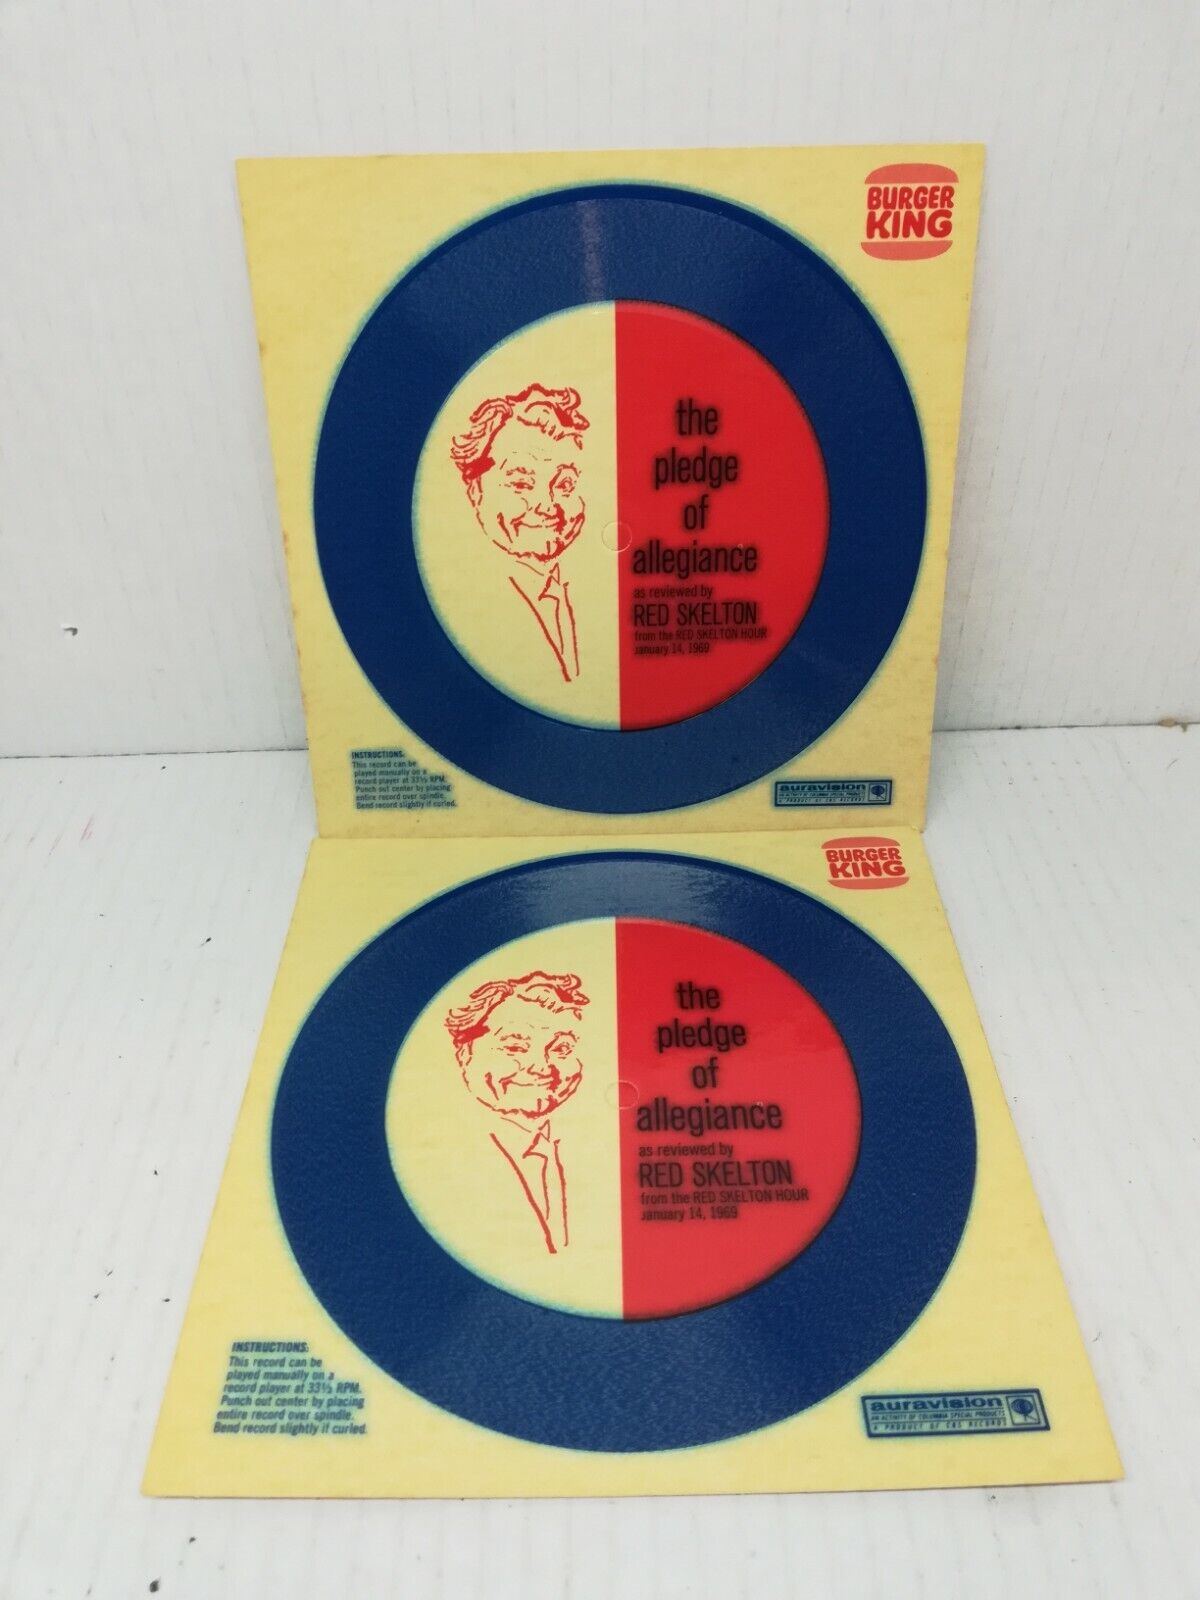 2x 1969 Burger King The Pledge of Allegiance-Red Skelton Cardboard 33 1/3 Record